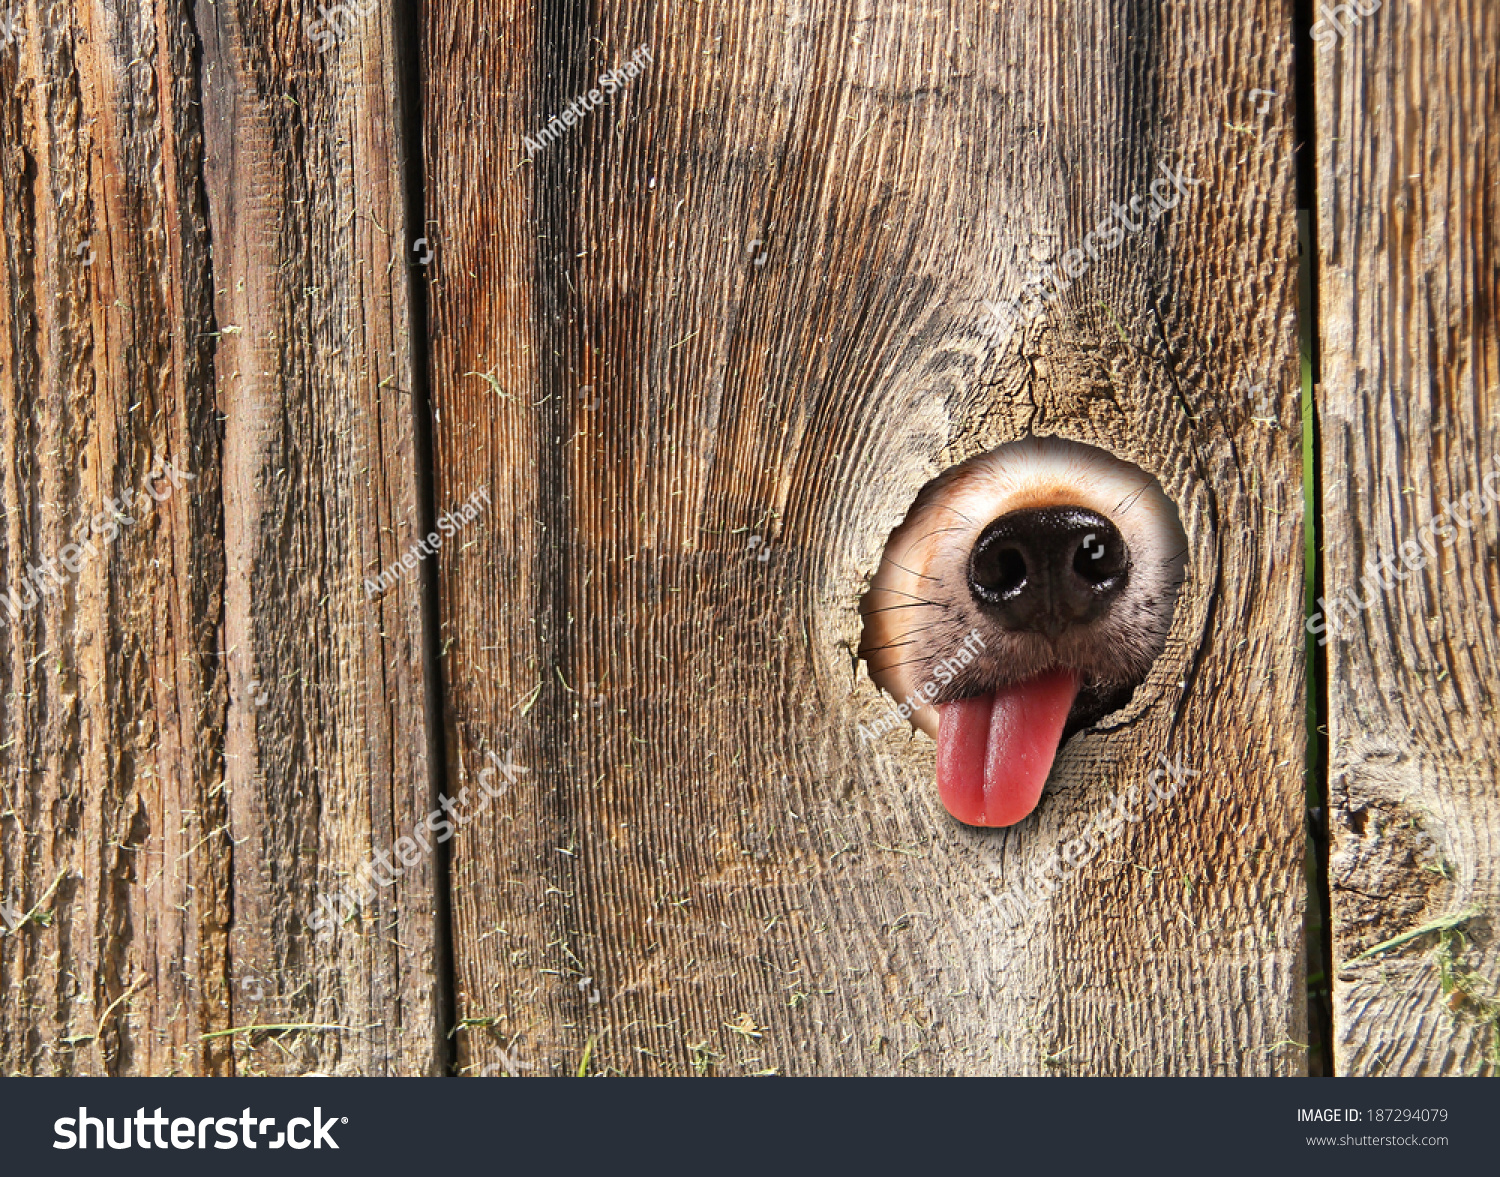 Cute Dogs Nose Tongue Poking Out Stock Photo 187294079 ...